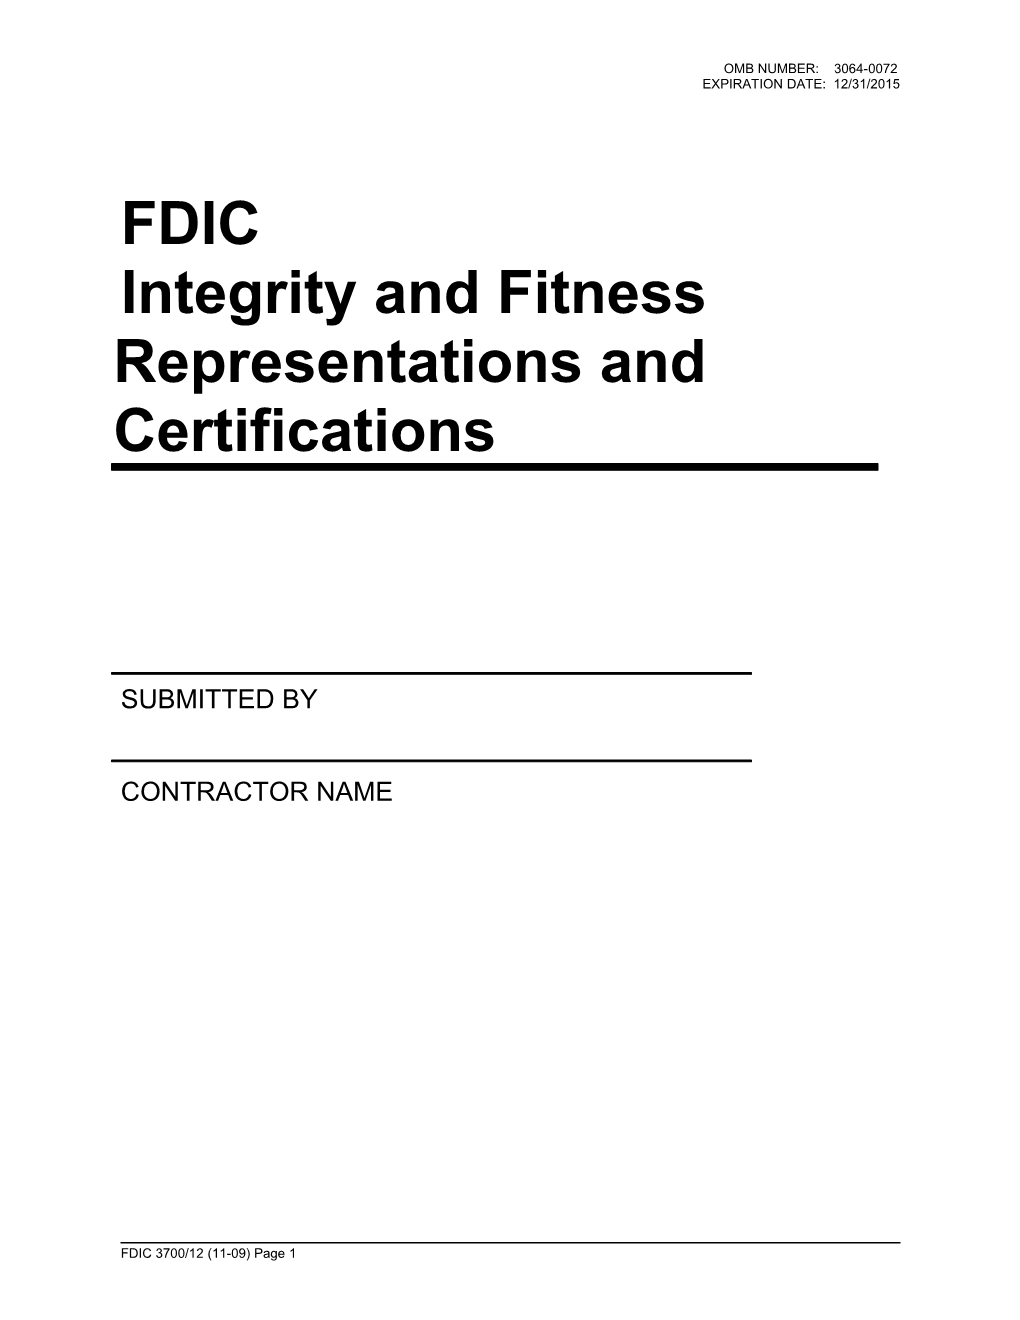 FDIC 3700/12, FDIC Eligibility Representations and Certifications